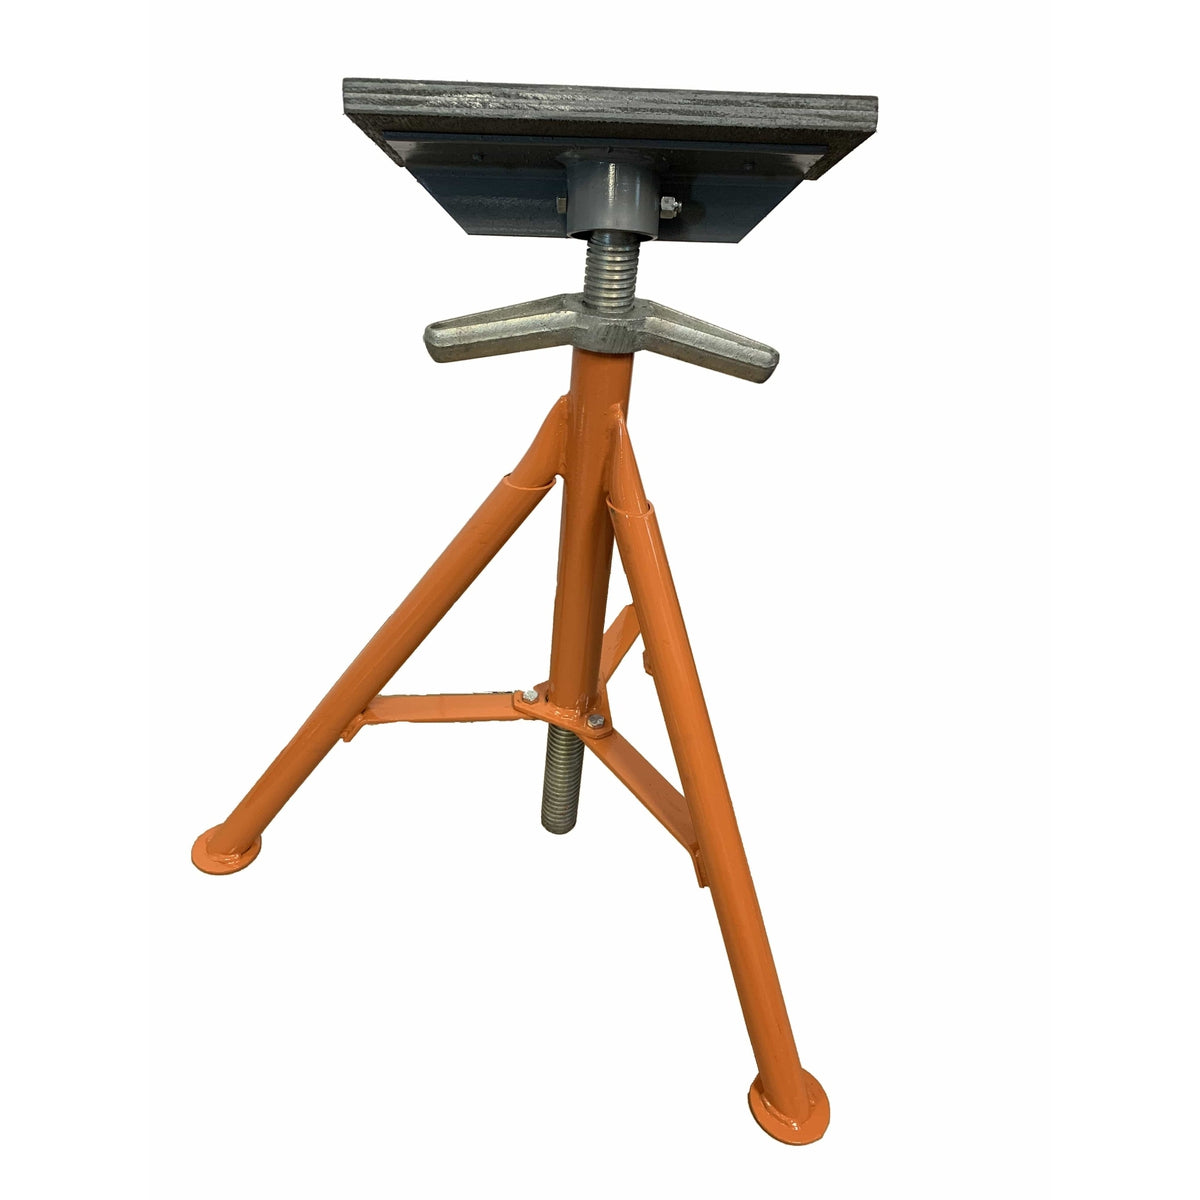 Brownell Boat Stands Qualifies for Free Shipping Brownell Boat Stands Ez Stor 2.5' Jack Stand #EZJS3